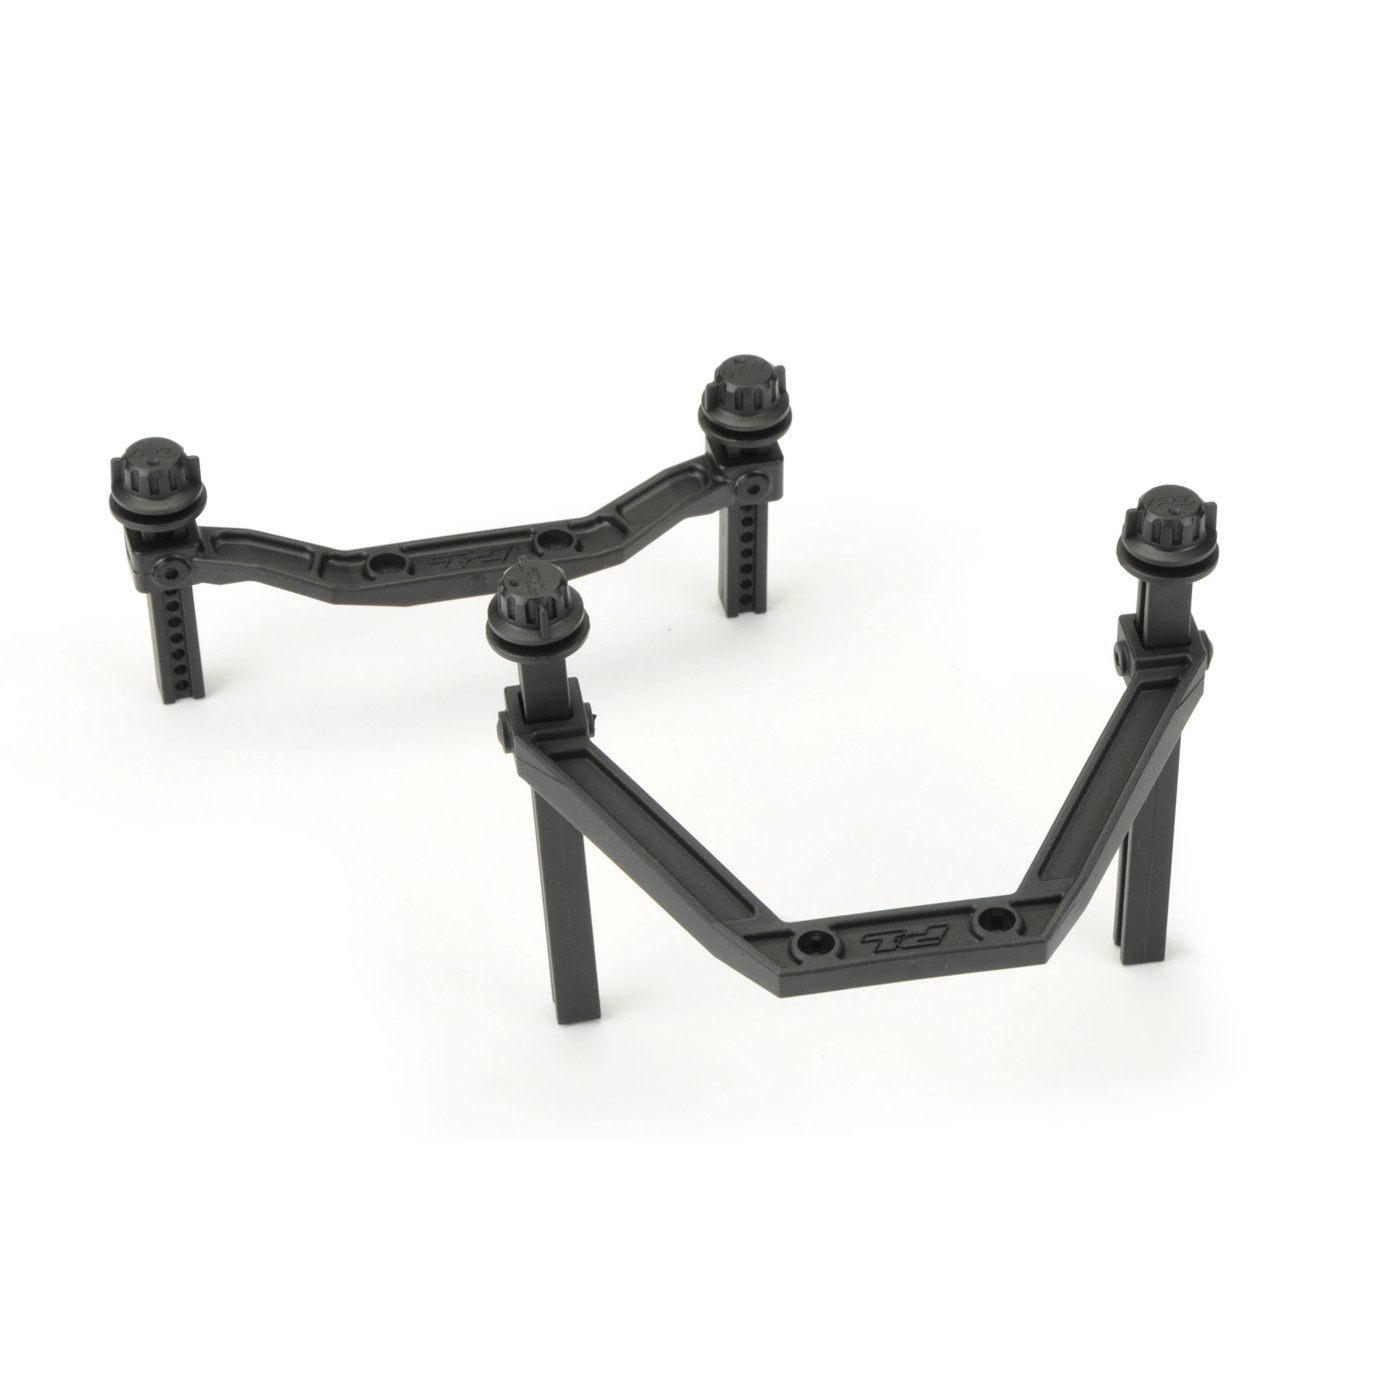 Integy RC Model Hop-ups C27862GREEN Extended Front Body Mount & Post Set for Traxxas Stampede 4X4 